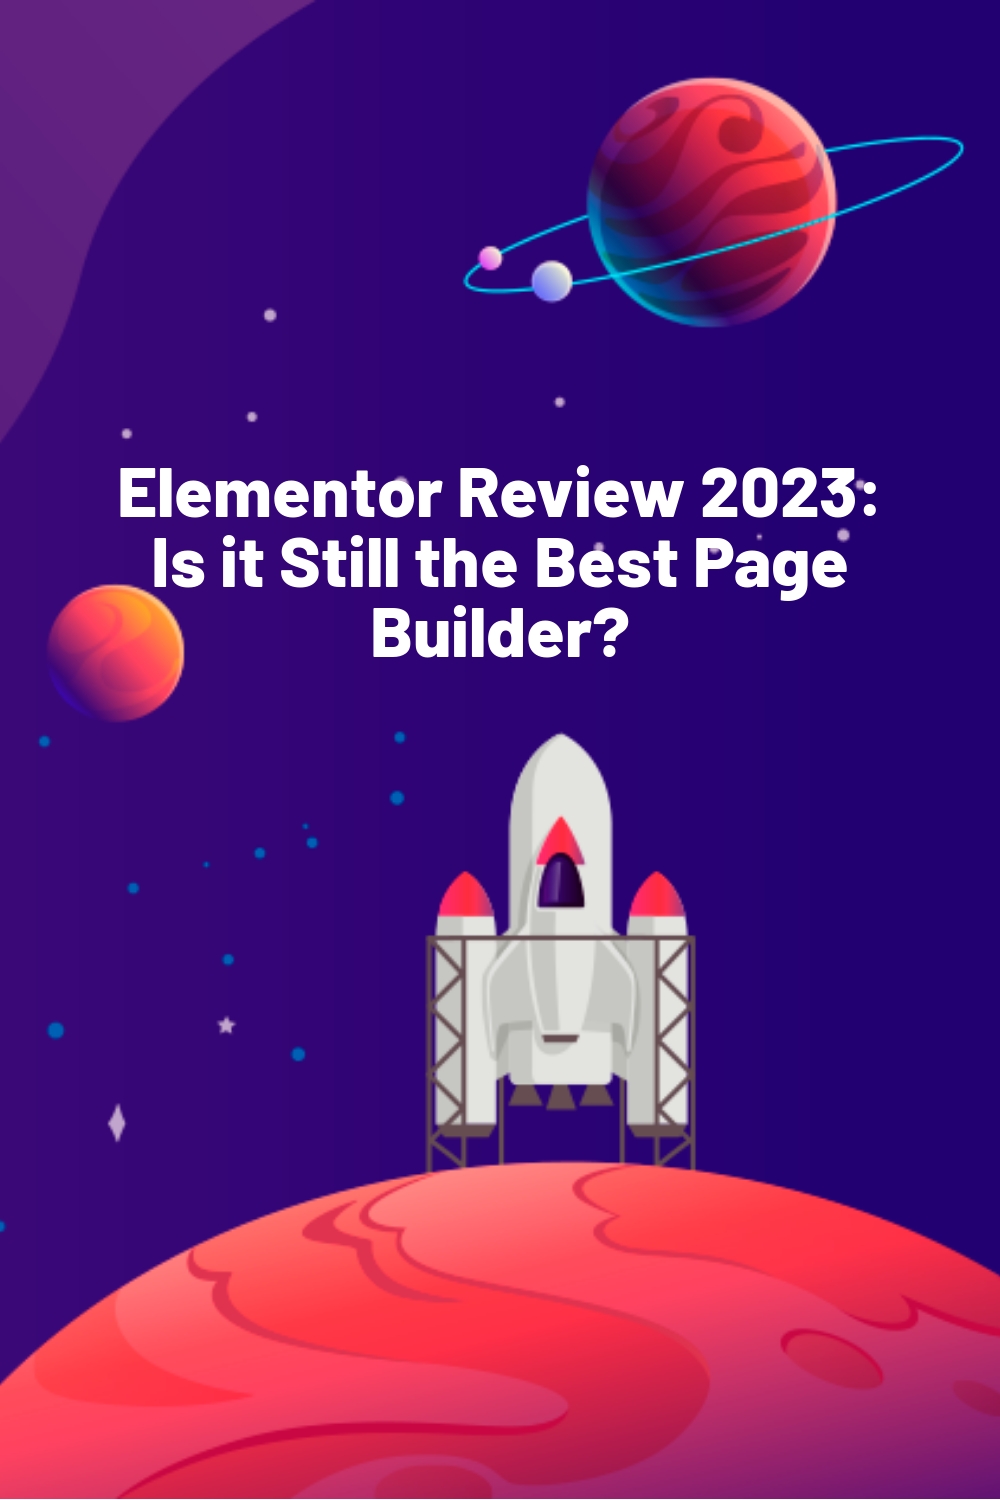 Elementor Review 2023: Is it Still the Best Page Builder?